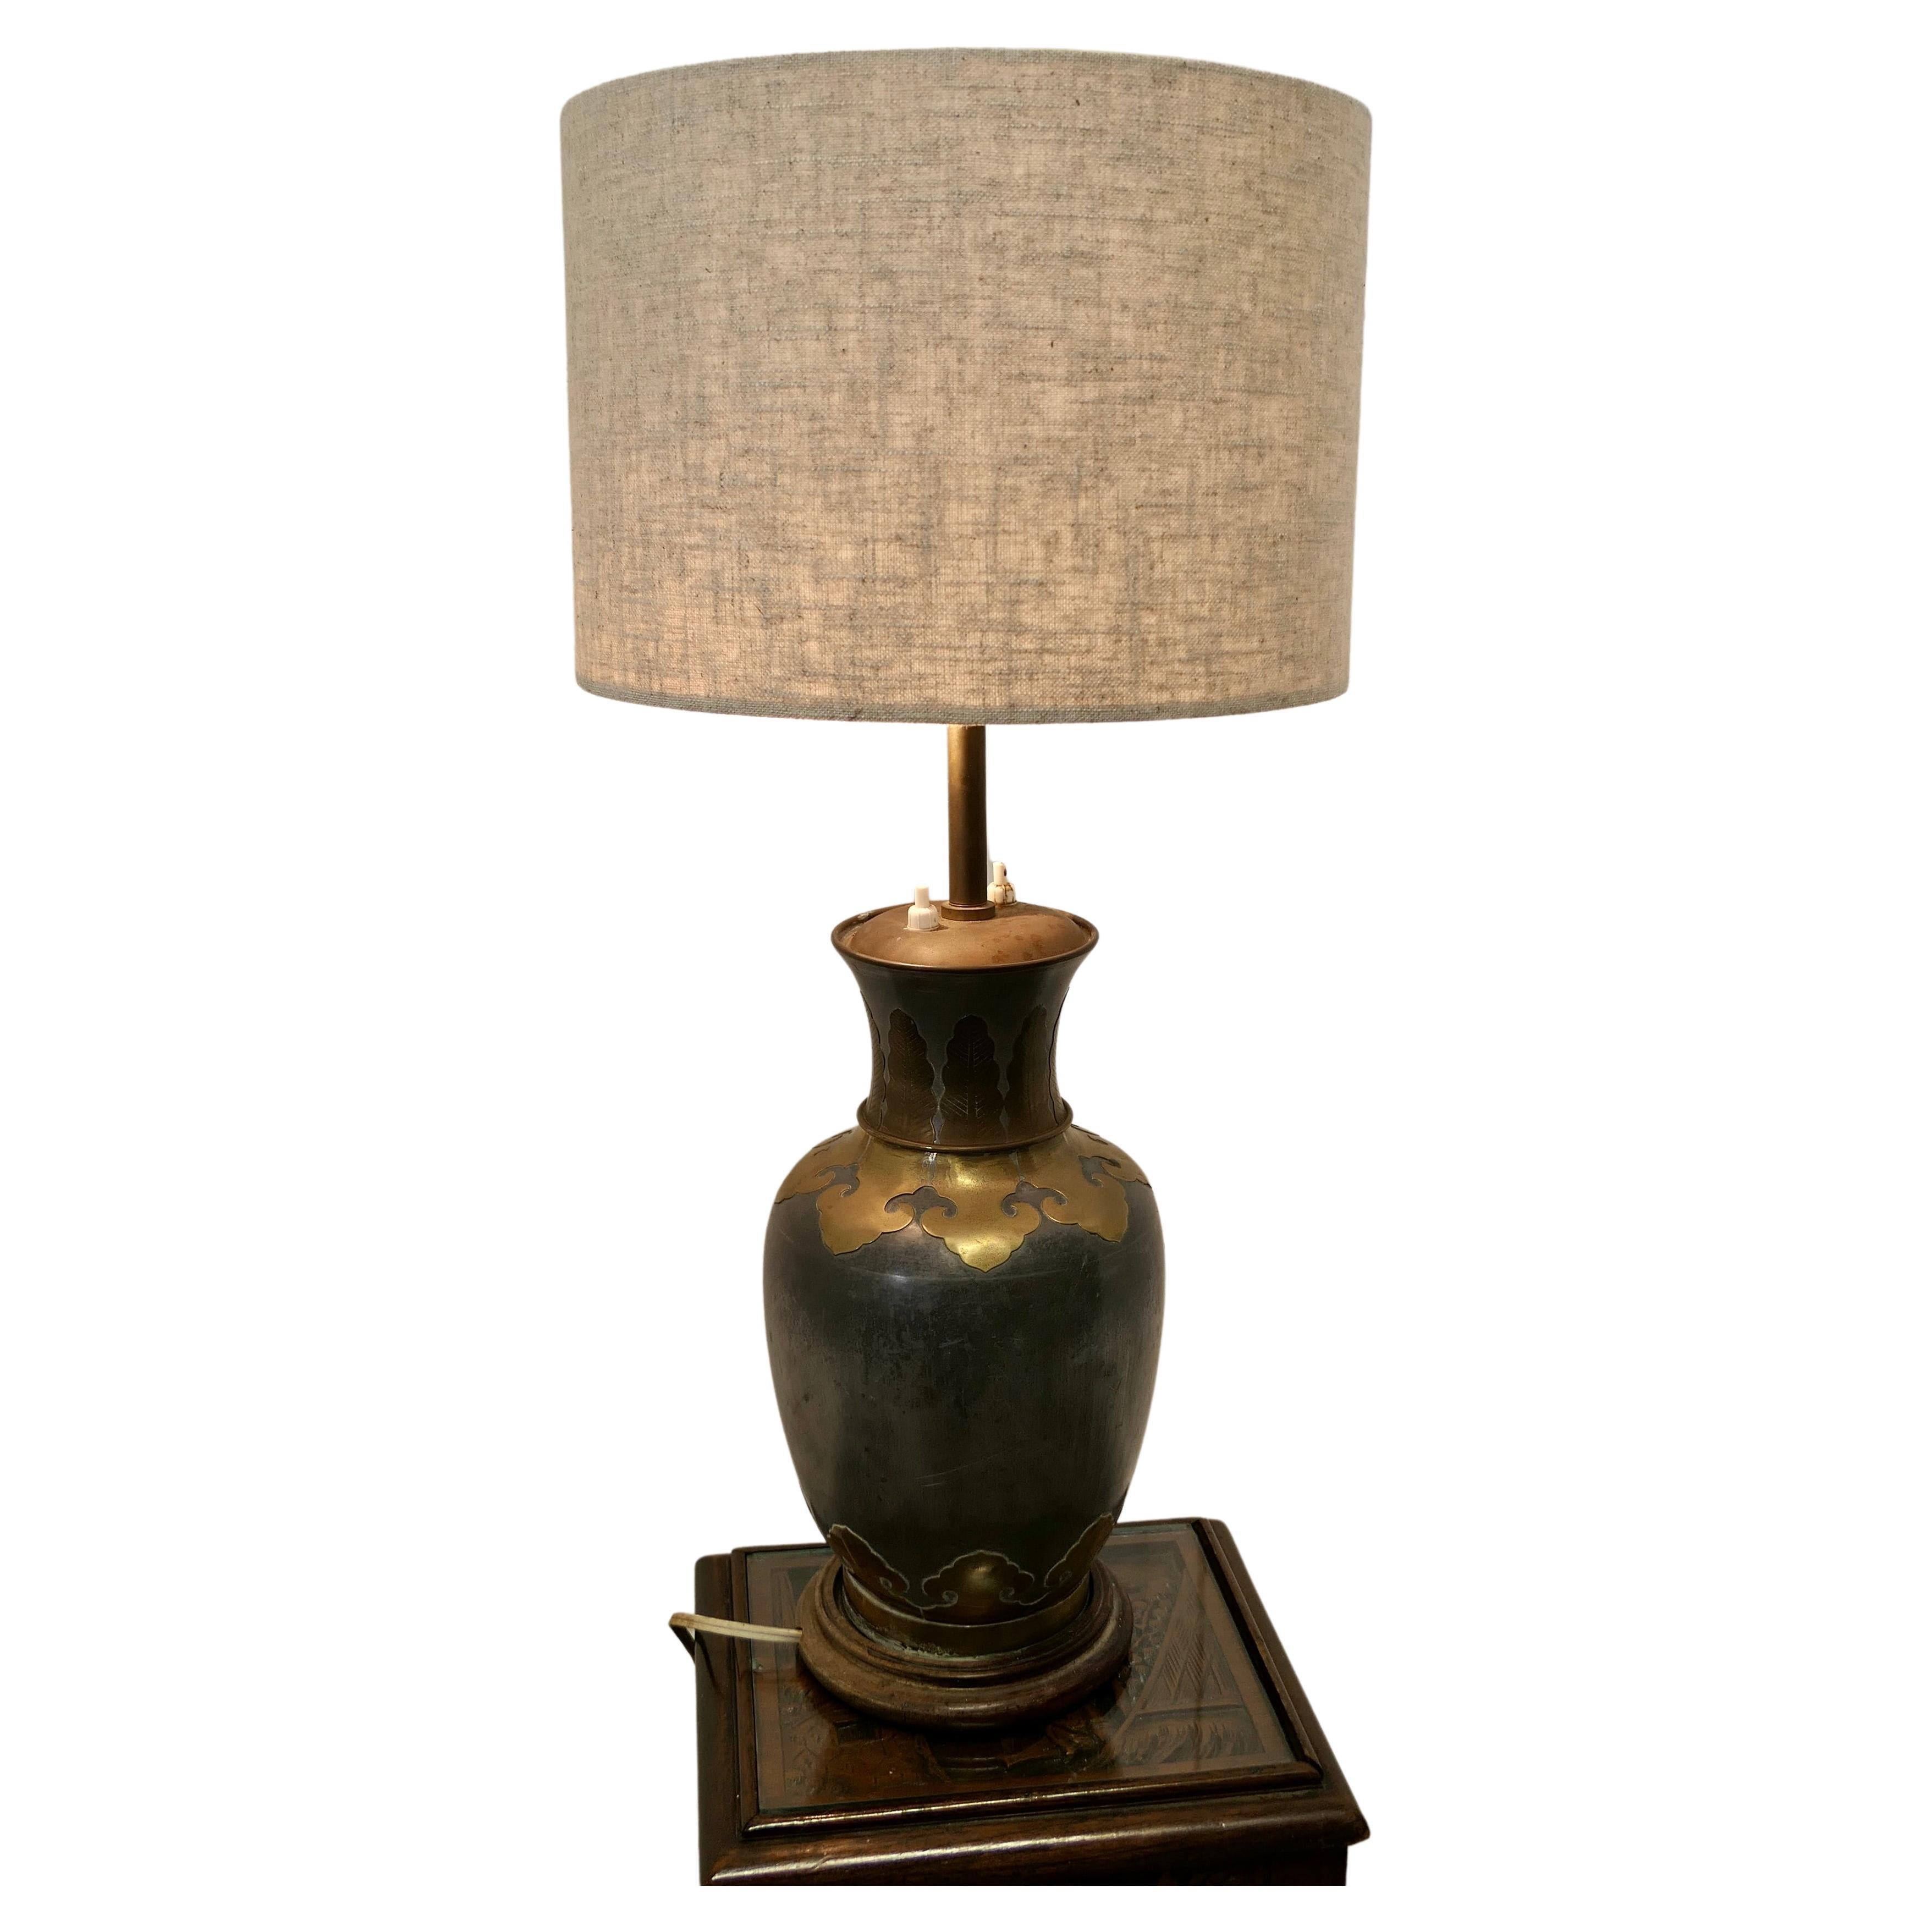 French Arts & Crafts Adjustable Brass and Pewter Table Lamp